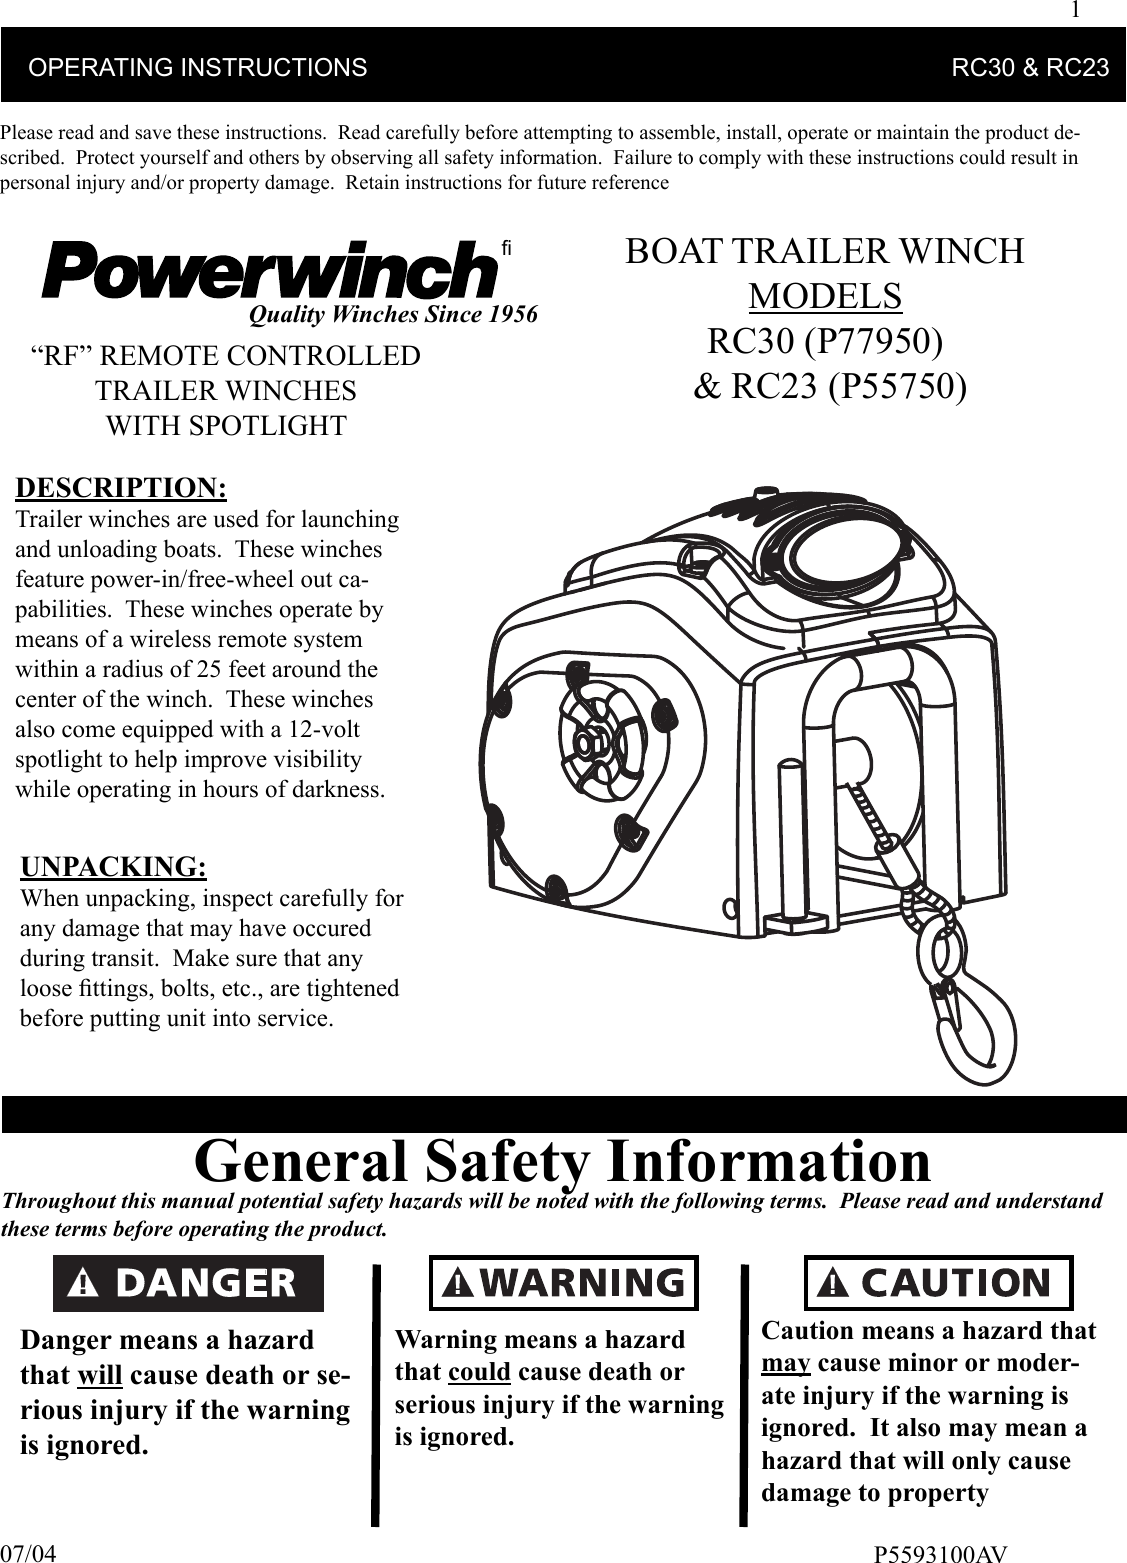 1    OPERATING INSTRUCTIONS                                                                                    RC30 &amp; RC23Please read and save these instructions.  Read carefully before attempting to assemble, install, operate or maintain the product de-scribed.  Protect yourself and others by observing all safety information.  Failure to comply with these instructions could result in personal injury and/or property damage.  Retain instructions for future referenceﬁQuality Winches Since 1956General Safety InformationThroughout this manual potential safety hazards will be noted with the following terms.  Please read and understand these terms before operating the product.Danger means a hazard that will cause death or se-rious injury if the warning is ignored.Caution means a hazard that  may cause minor or moder-ate injury if the warning is ignored.  It also may mean a hazard that will only cause damage to propertyWarning means a hazard that could cause death or serious injury if the warning is ignored.P5593100AV07/04“RF” REMOTE CONTROLLEDTRAILER WINCHESWITH SPOTLIGHTBOAT TRAILER WINCHMODELS RC30 (P77950) &amp; RC23 (P55750)DESCRIPTION:Trailer winches are used for launching and unloading boats.  These winches feature power-in/free-wheel out ca-pabilities.  These winches operate by means of a wireless remote system within a radius of 25 feet around the center of the winch.  These winches also come equipped with a 12-volt spotlight to help improve visibility while operating in hours of darkness. UNPACKING:When unpacking, inspect carefully for any damage that may have occured during transit.  Make sure that any loose ﬁ ttings, bolts, etc., are tightened before putting unit into service.